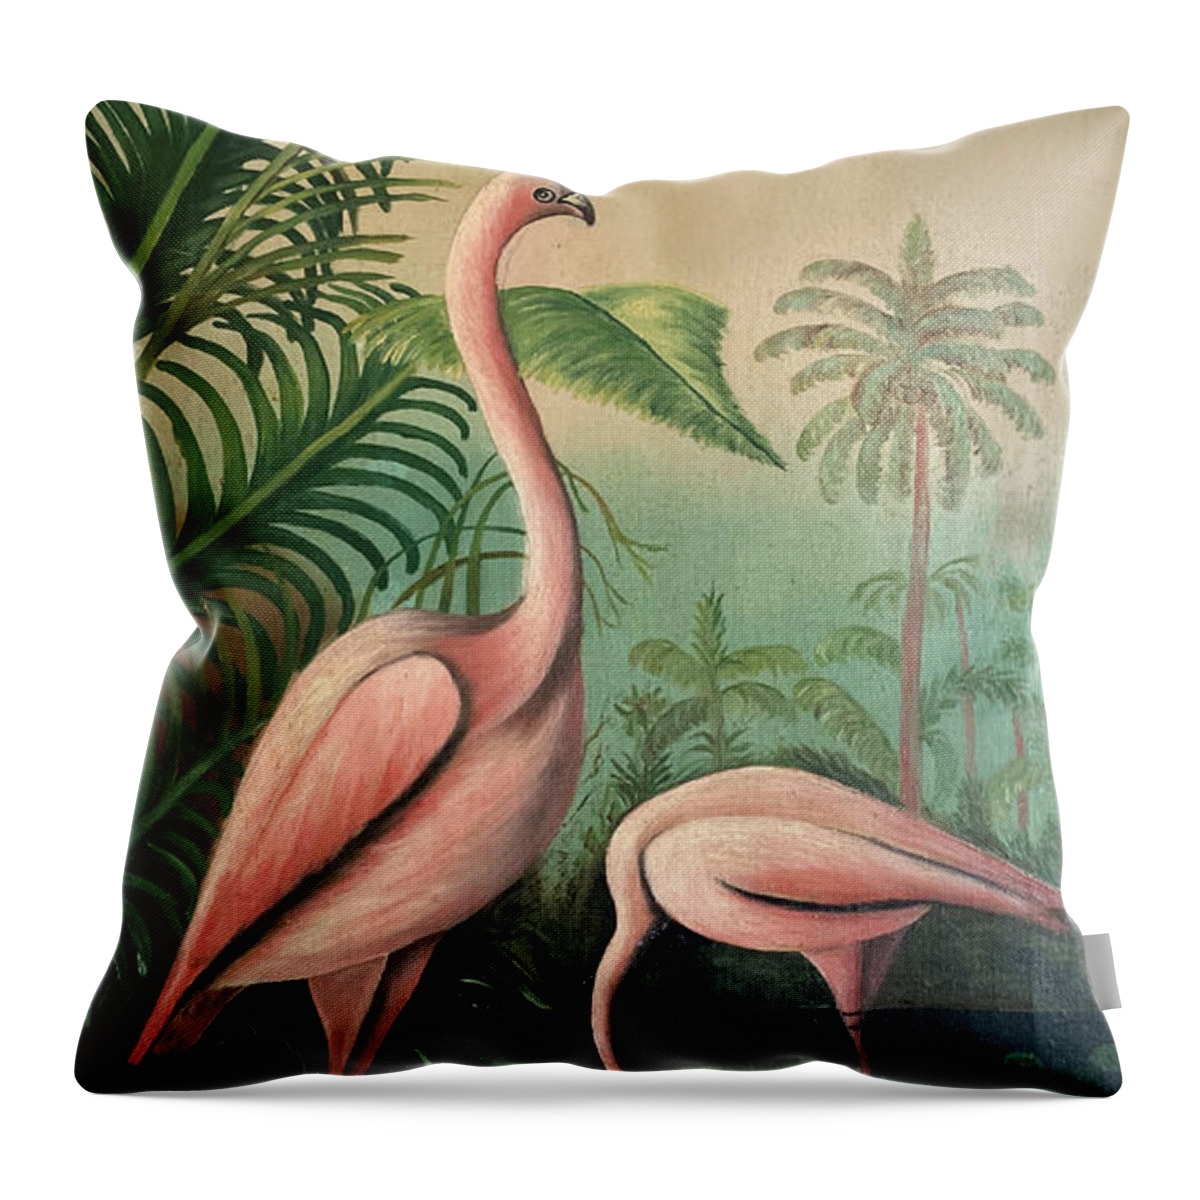 Vintage Throw Pillow featuring the painting Vintage Painting Pink Flamingos by Marilyn Hunt